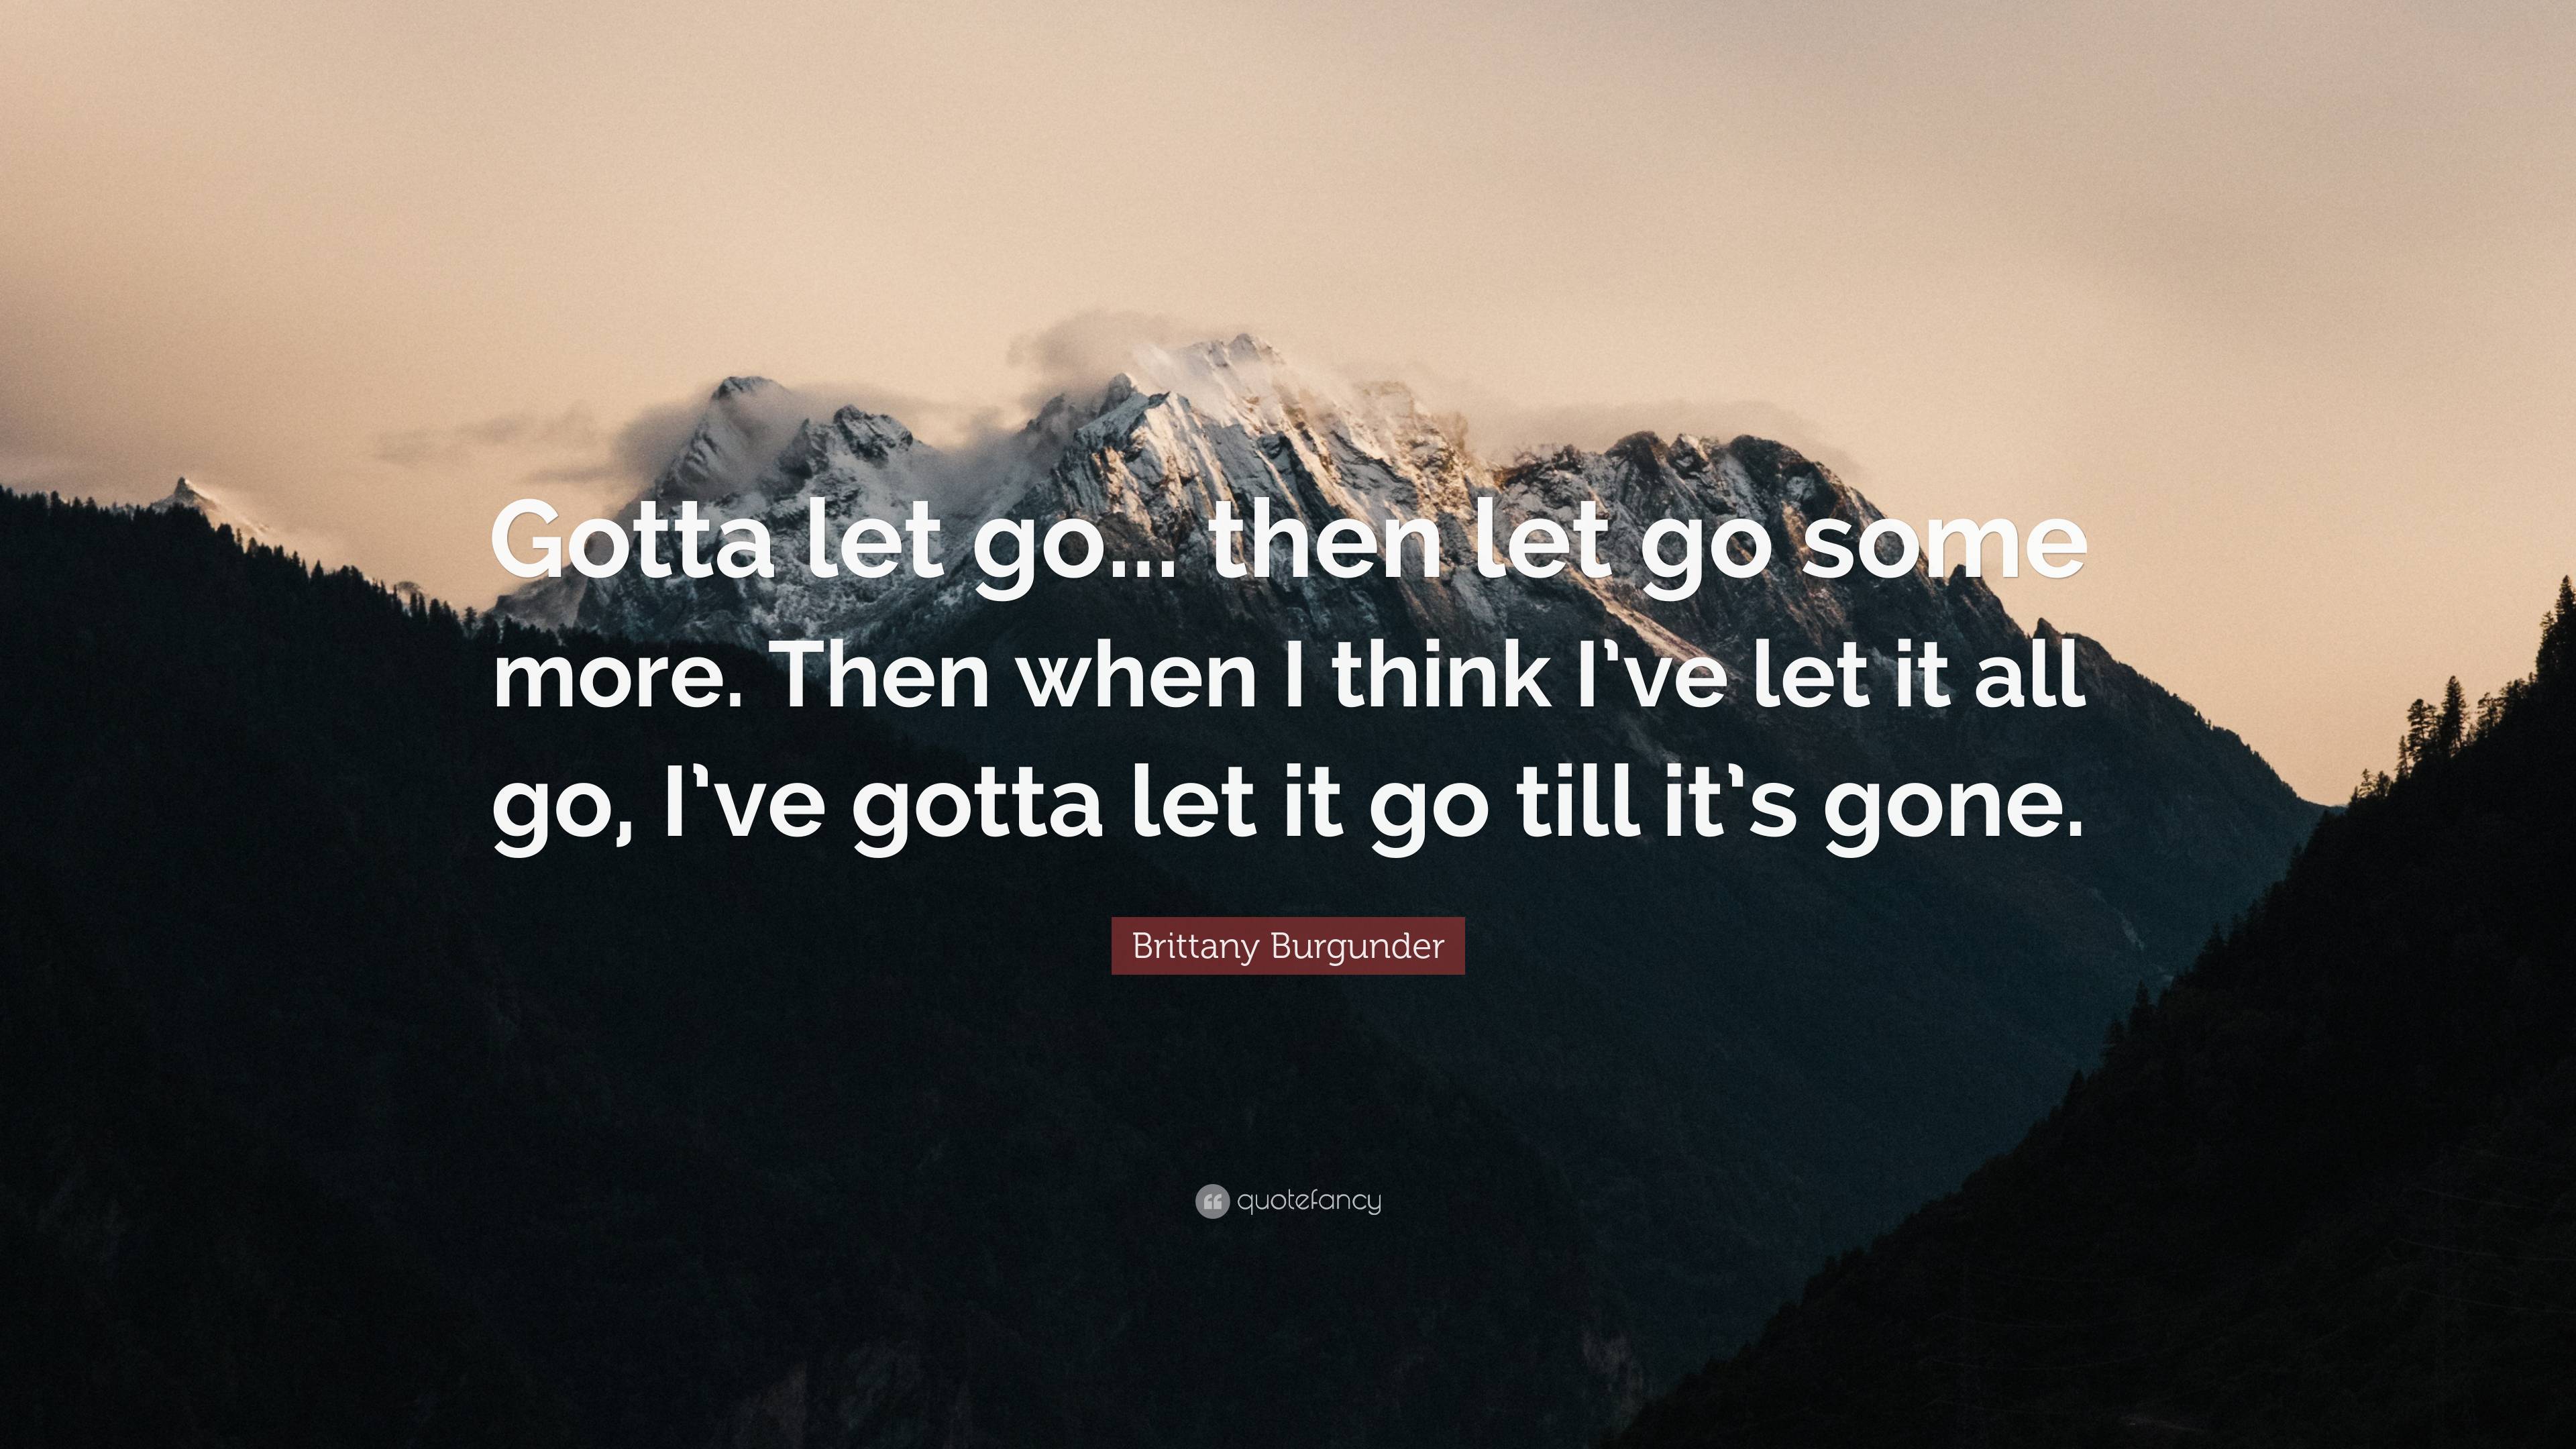 Brittany Burgunder Quote: “Gotta let go... then let go some more. Then ...